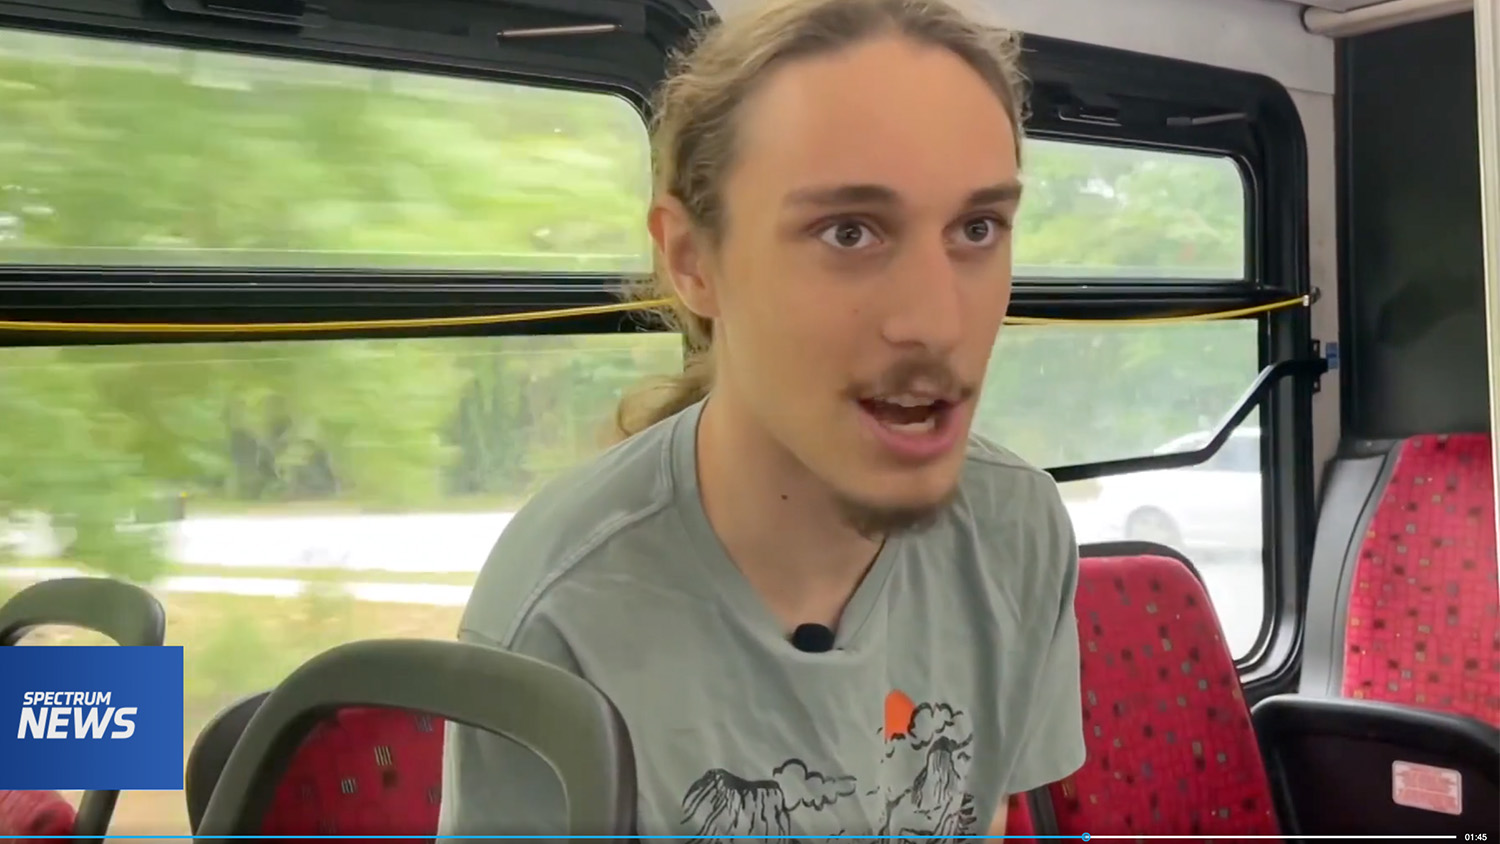 Etienne Phillips sitting inside a Wolf Line bus and speaking to the camera